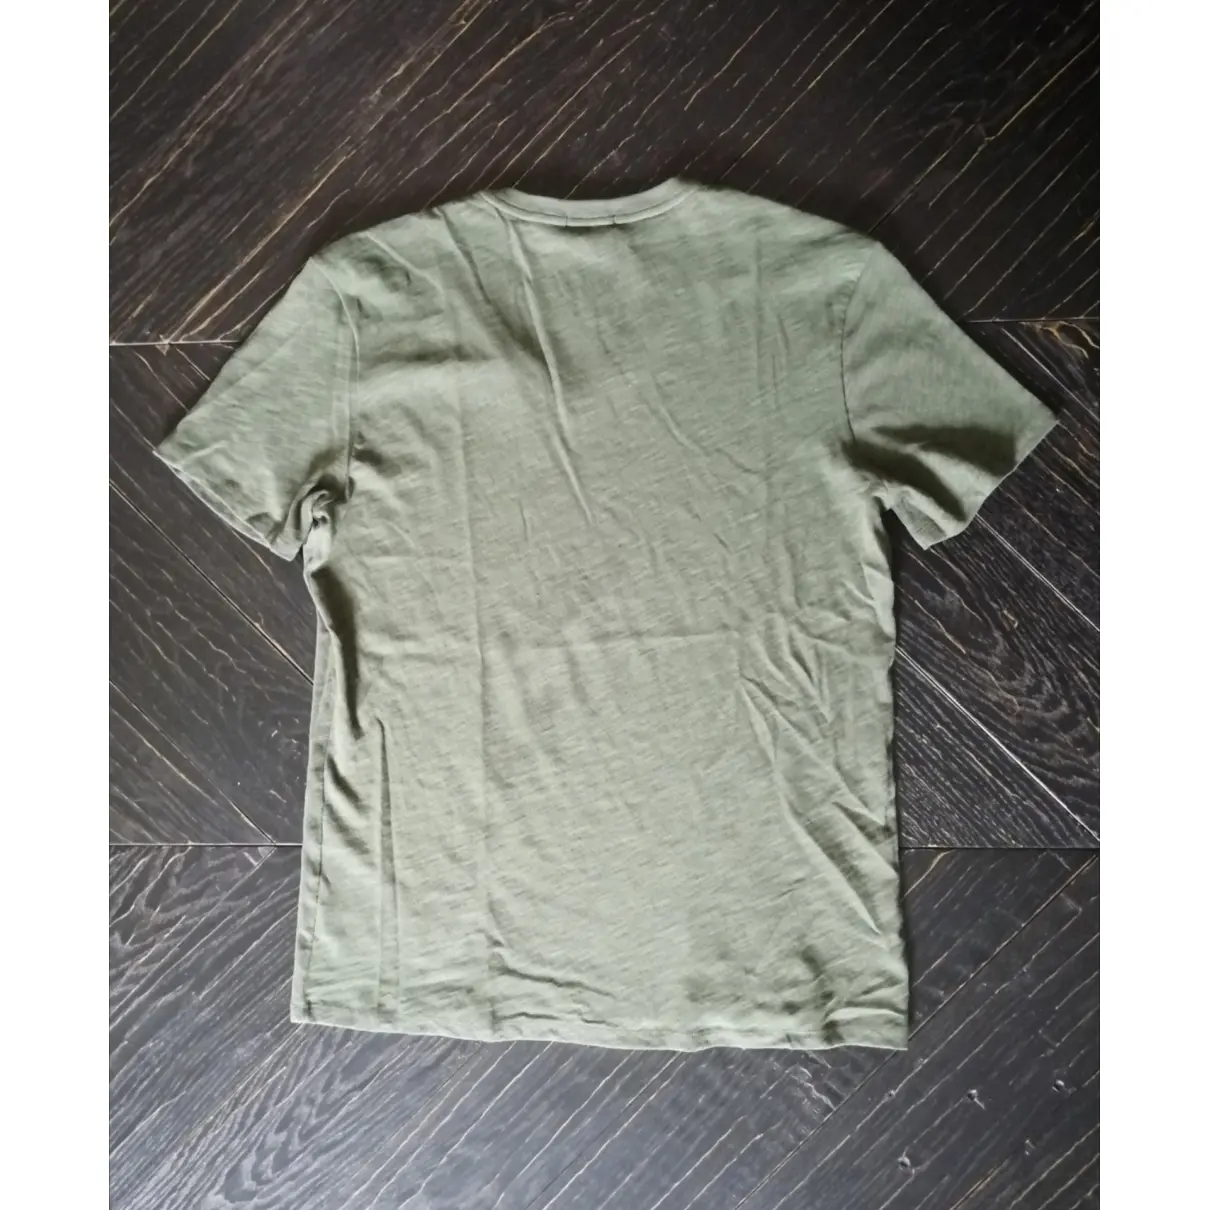 Atm Green Cotton T-shirt for sale